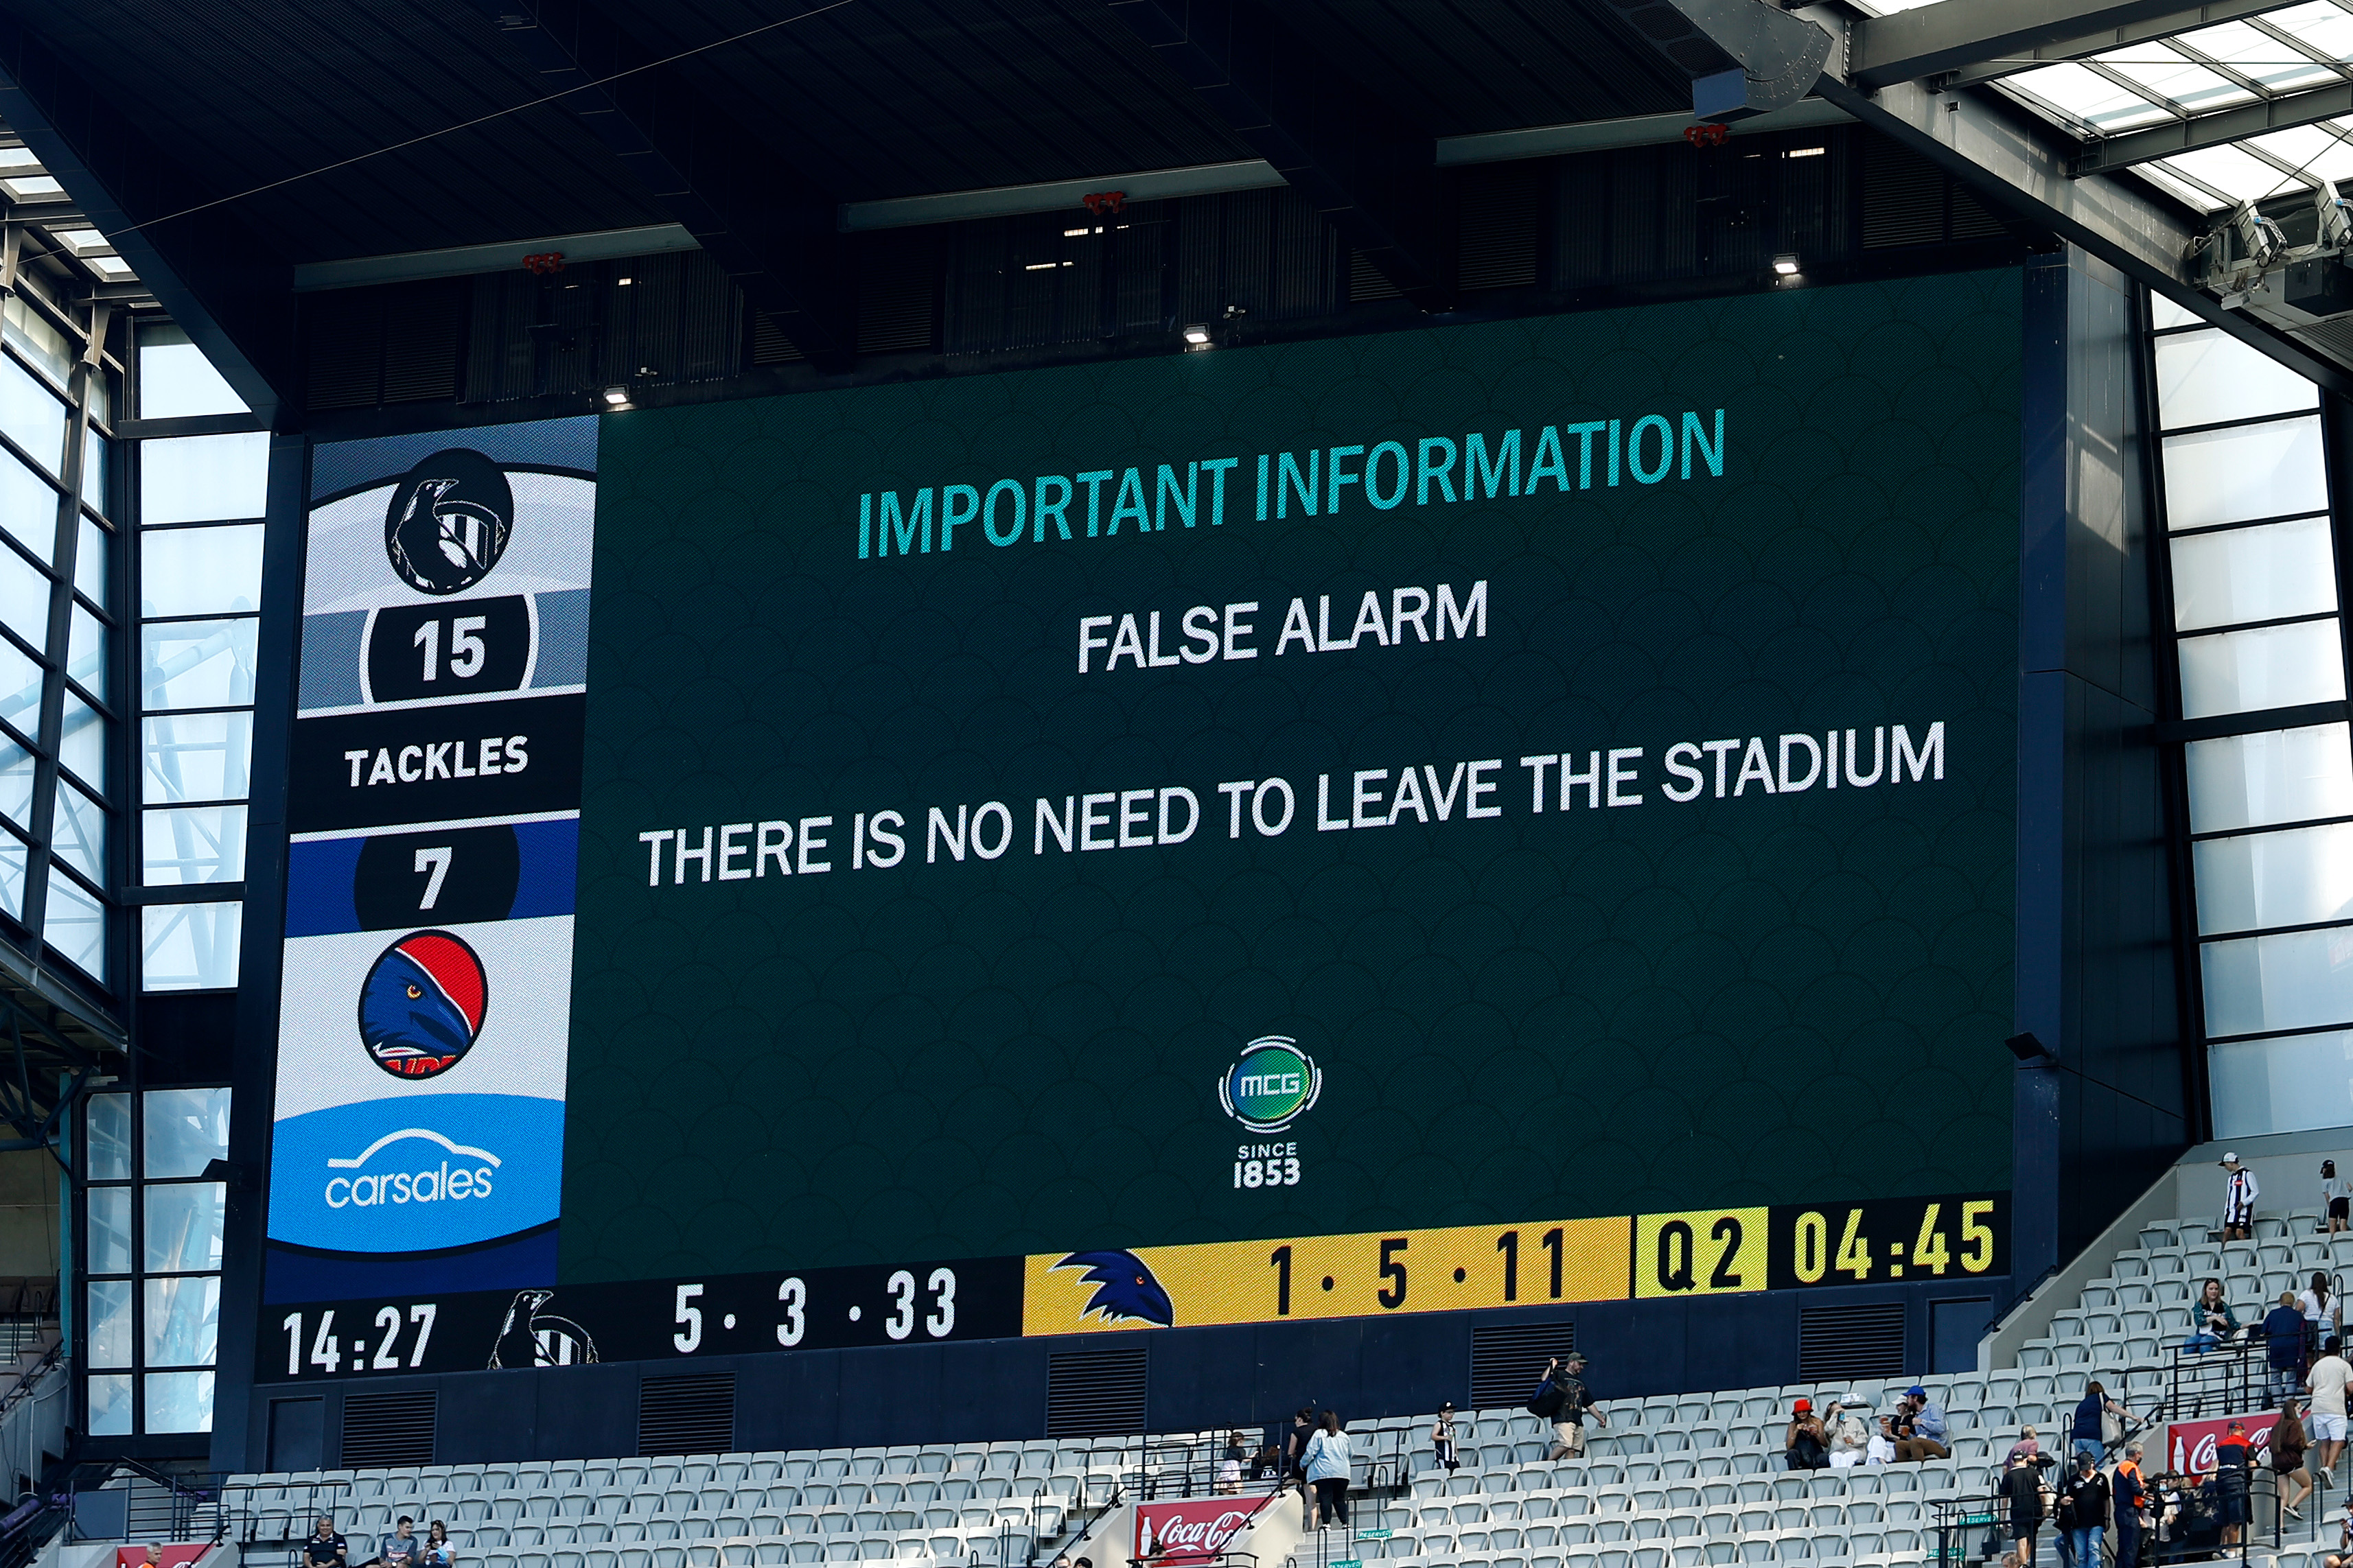 A false alarm message is displayed on the big screen at the MCG.